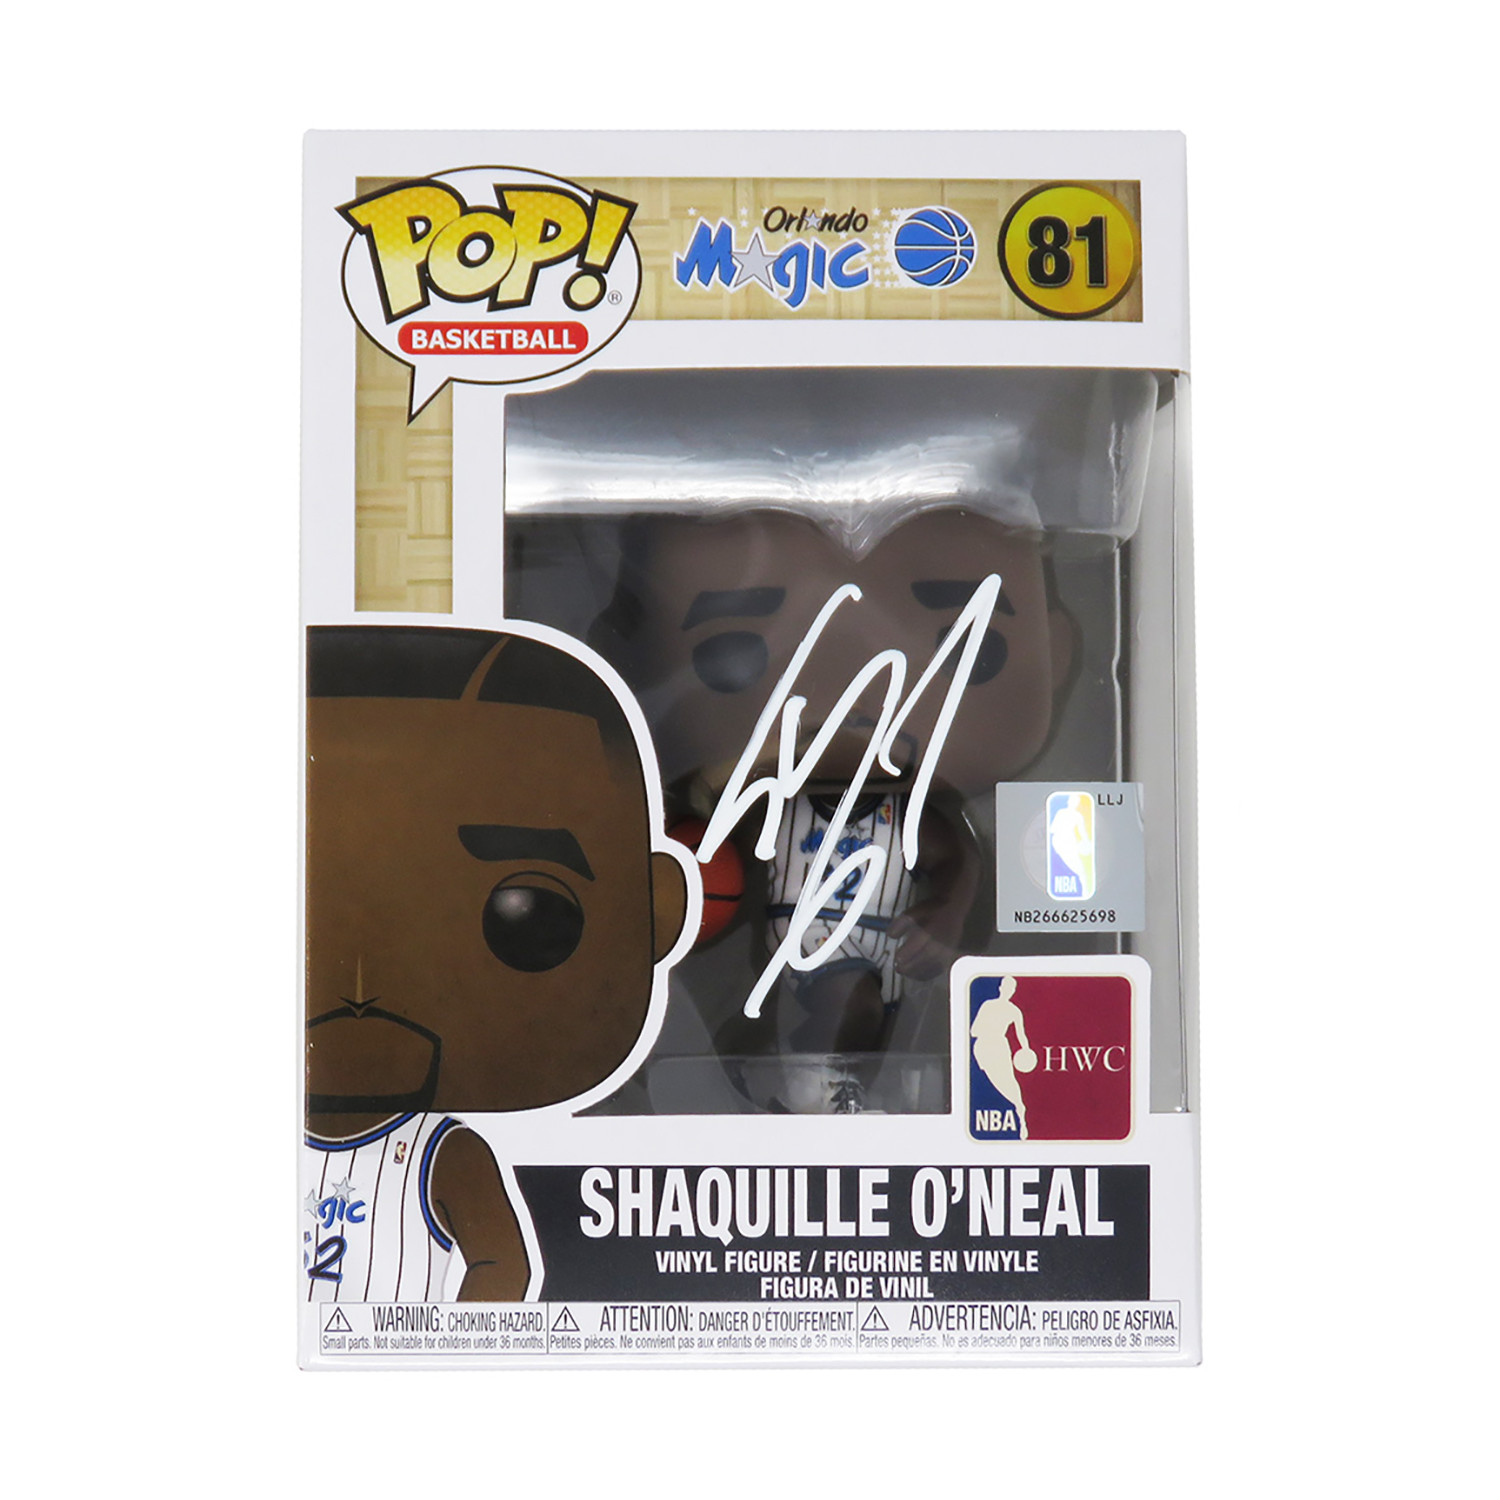 NBA Shaquille O'Neal Signed Photos, Collectible Shaquille O'Neal